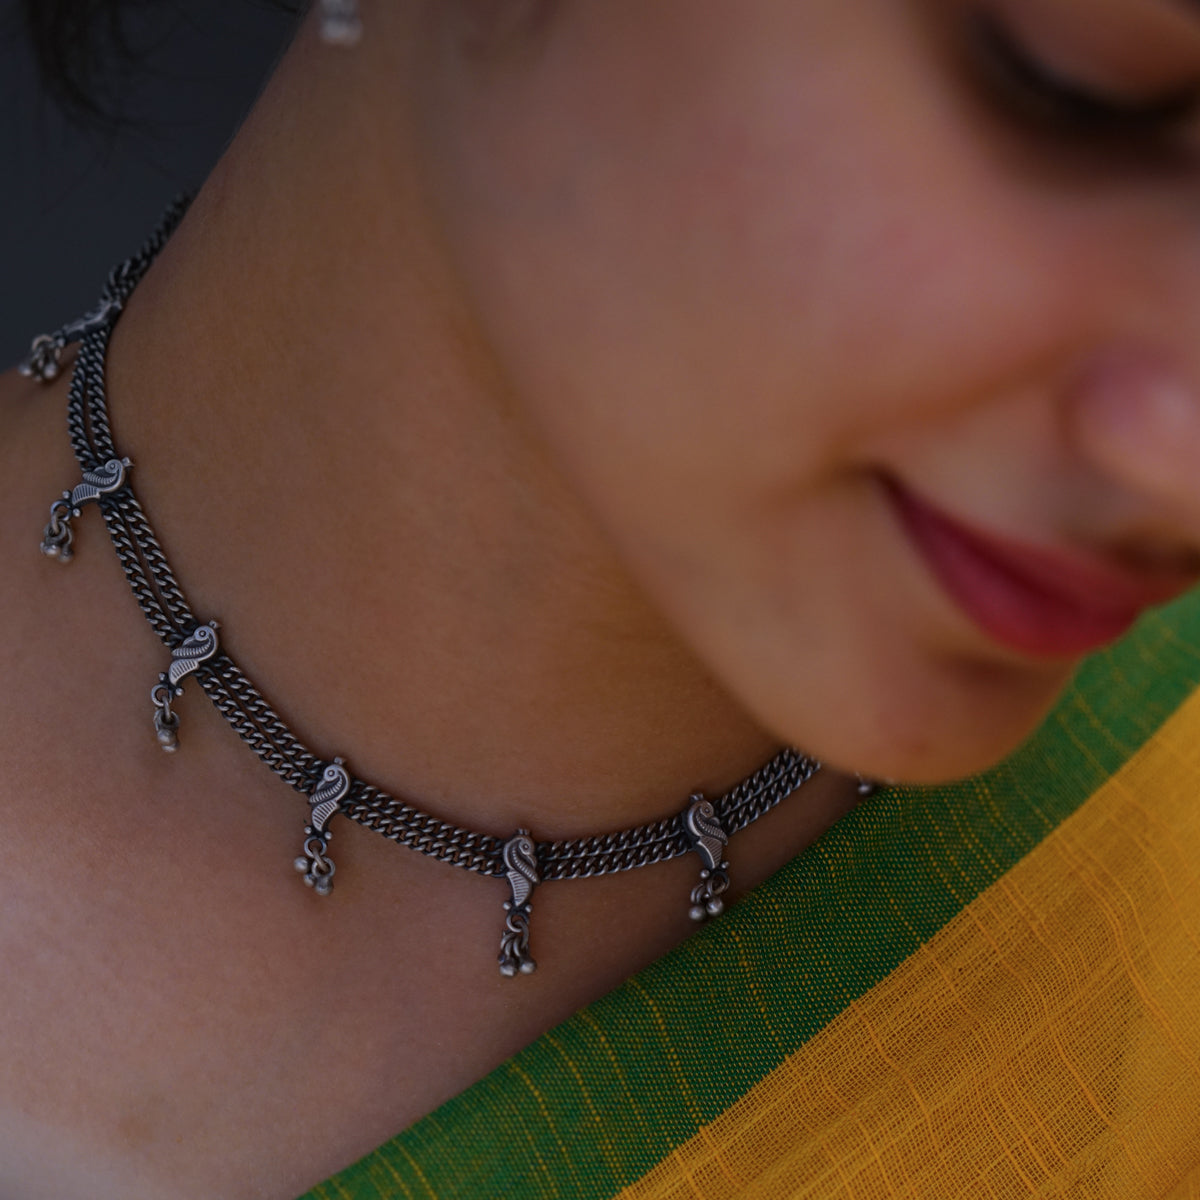 a close up of a woman wearing a necklace